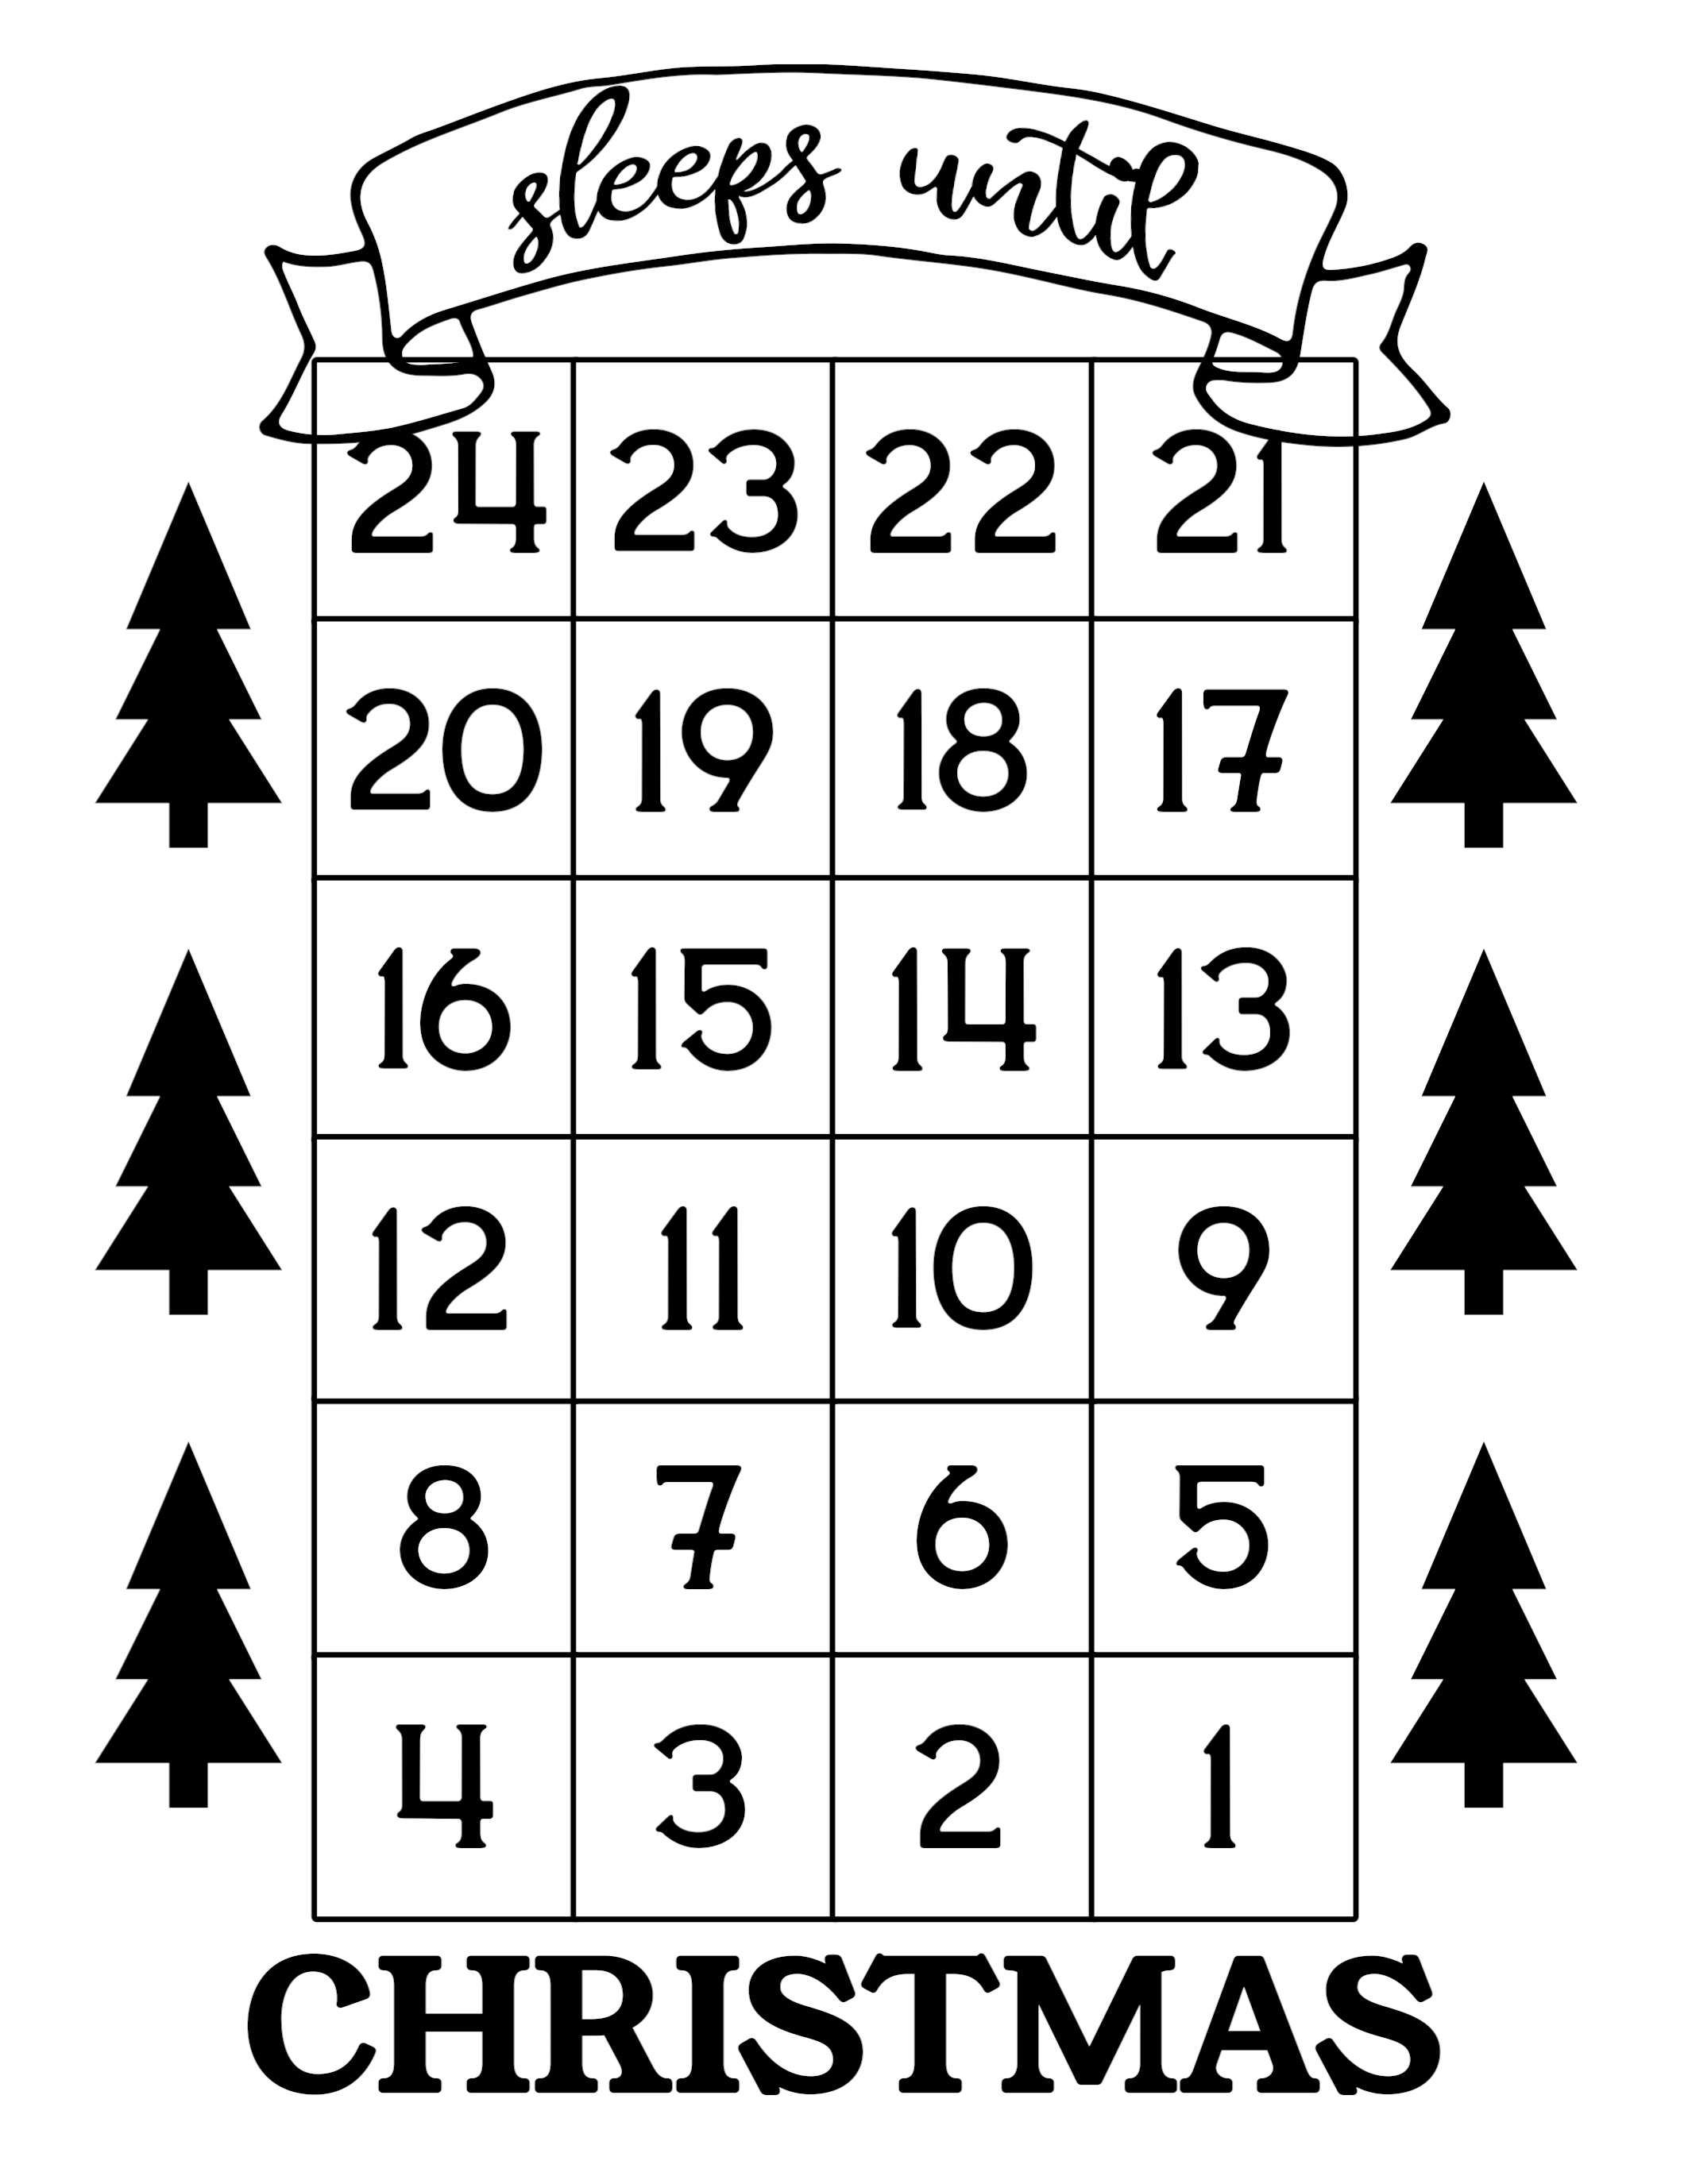 How Many Days Until Christmas Free Printable - Paper Trail Printable Countdown To Christmas 2020